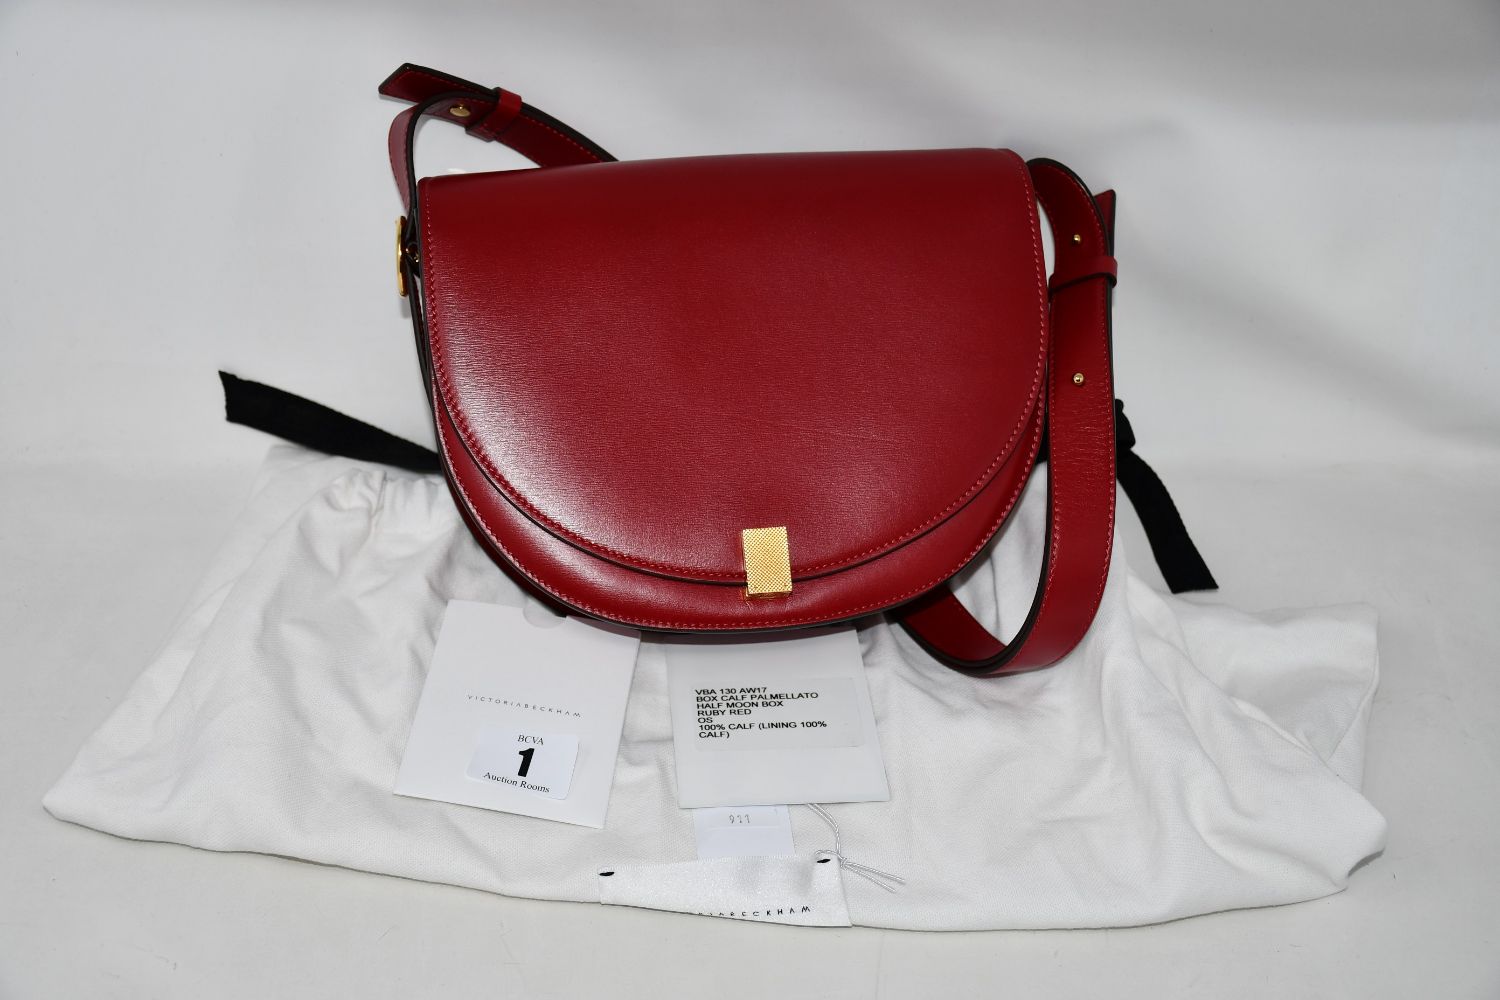 TIMED ONLINE AUCTION: Handbags, Clothing, Footwear, Fragrances, Sunglasses, Hand Tools and Other Unclaimed Property